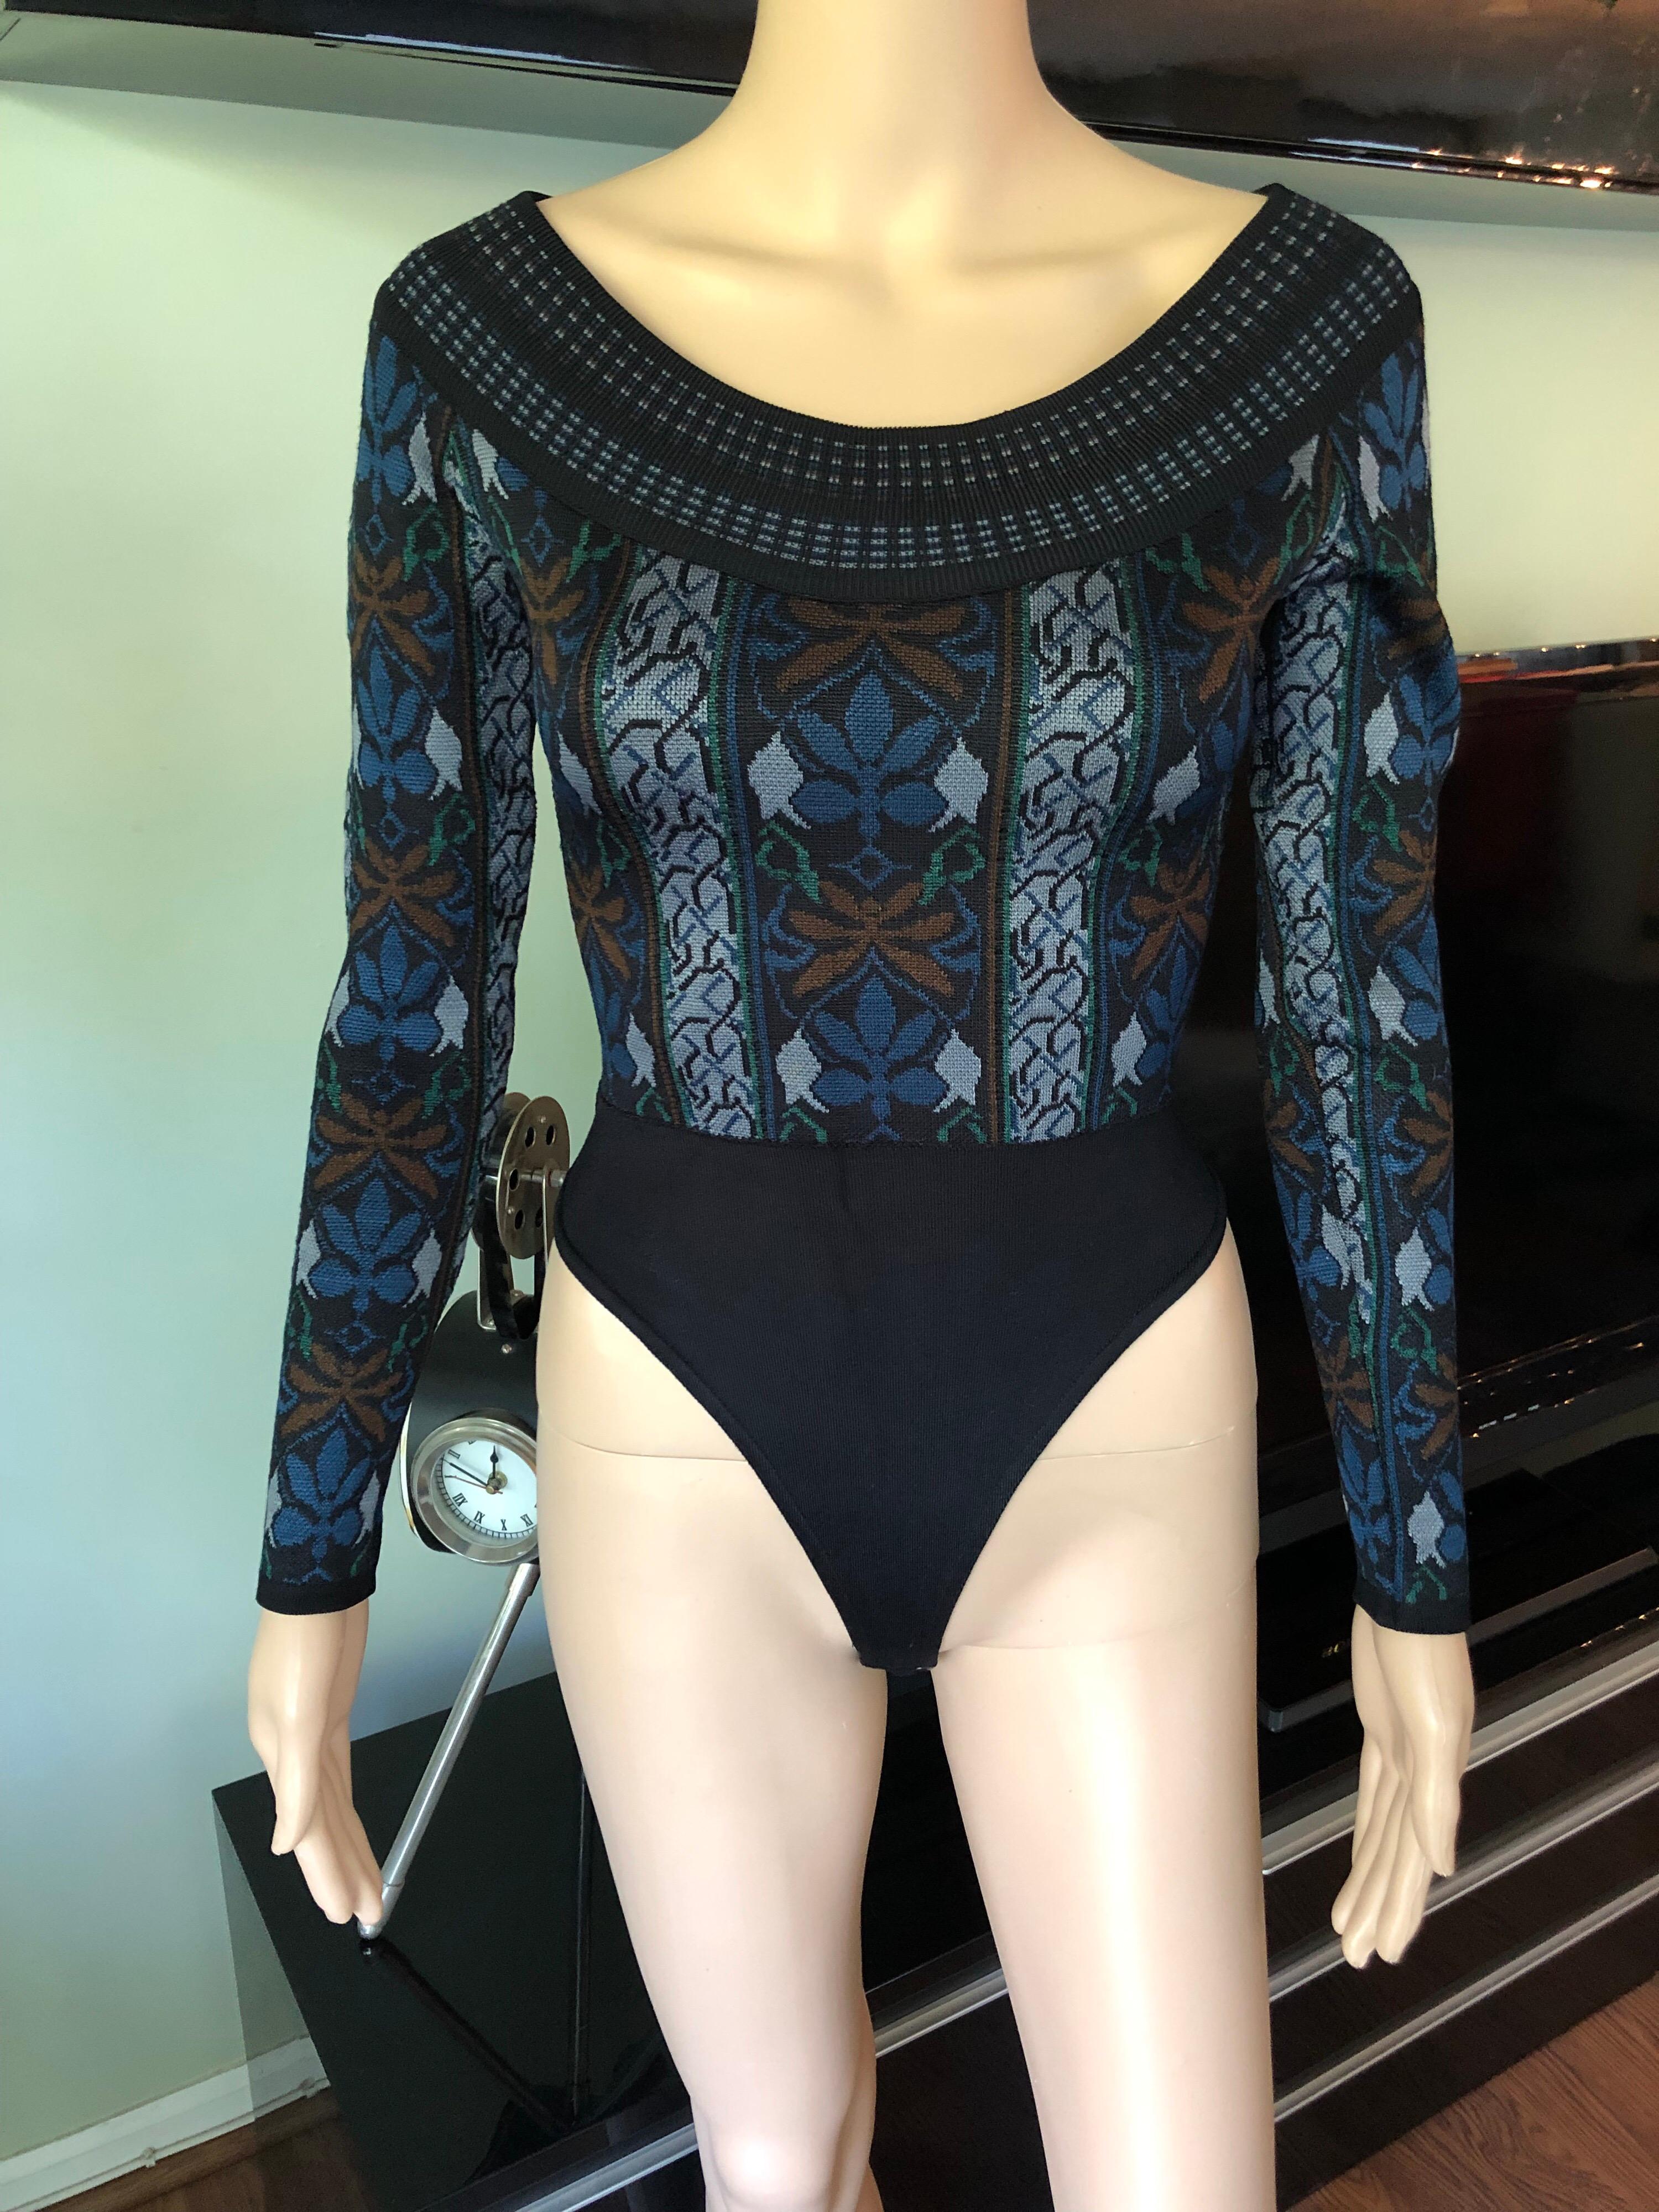 Azzedine Alaia F/W 1990 Vintage Knit Bodysuit XS

Alaïa vintage knit bodysuit with abstract pattern throughout, scoop neck and snap closures at inseam.
